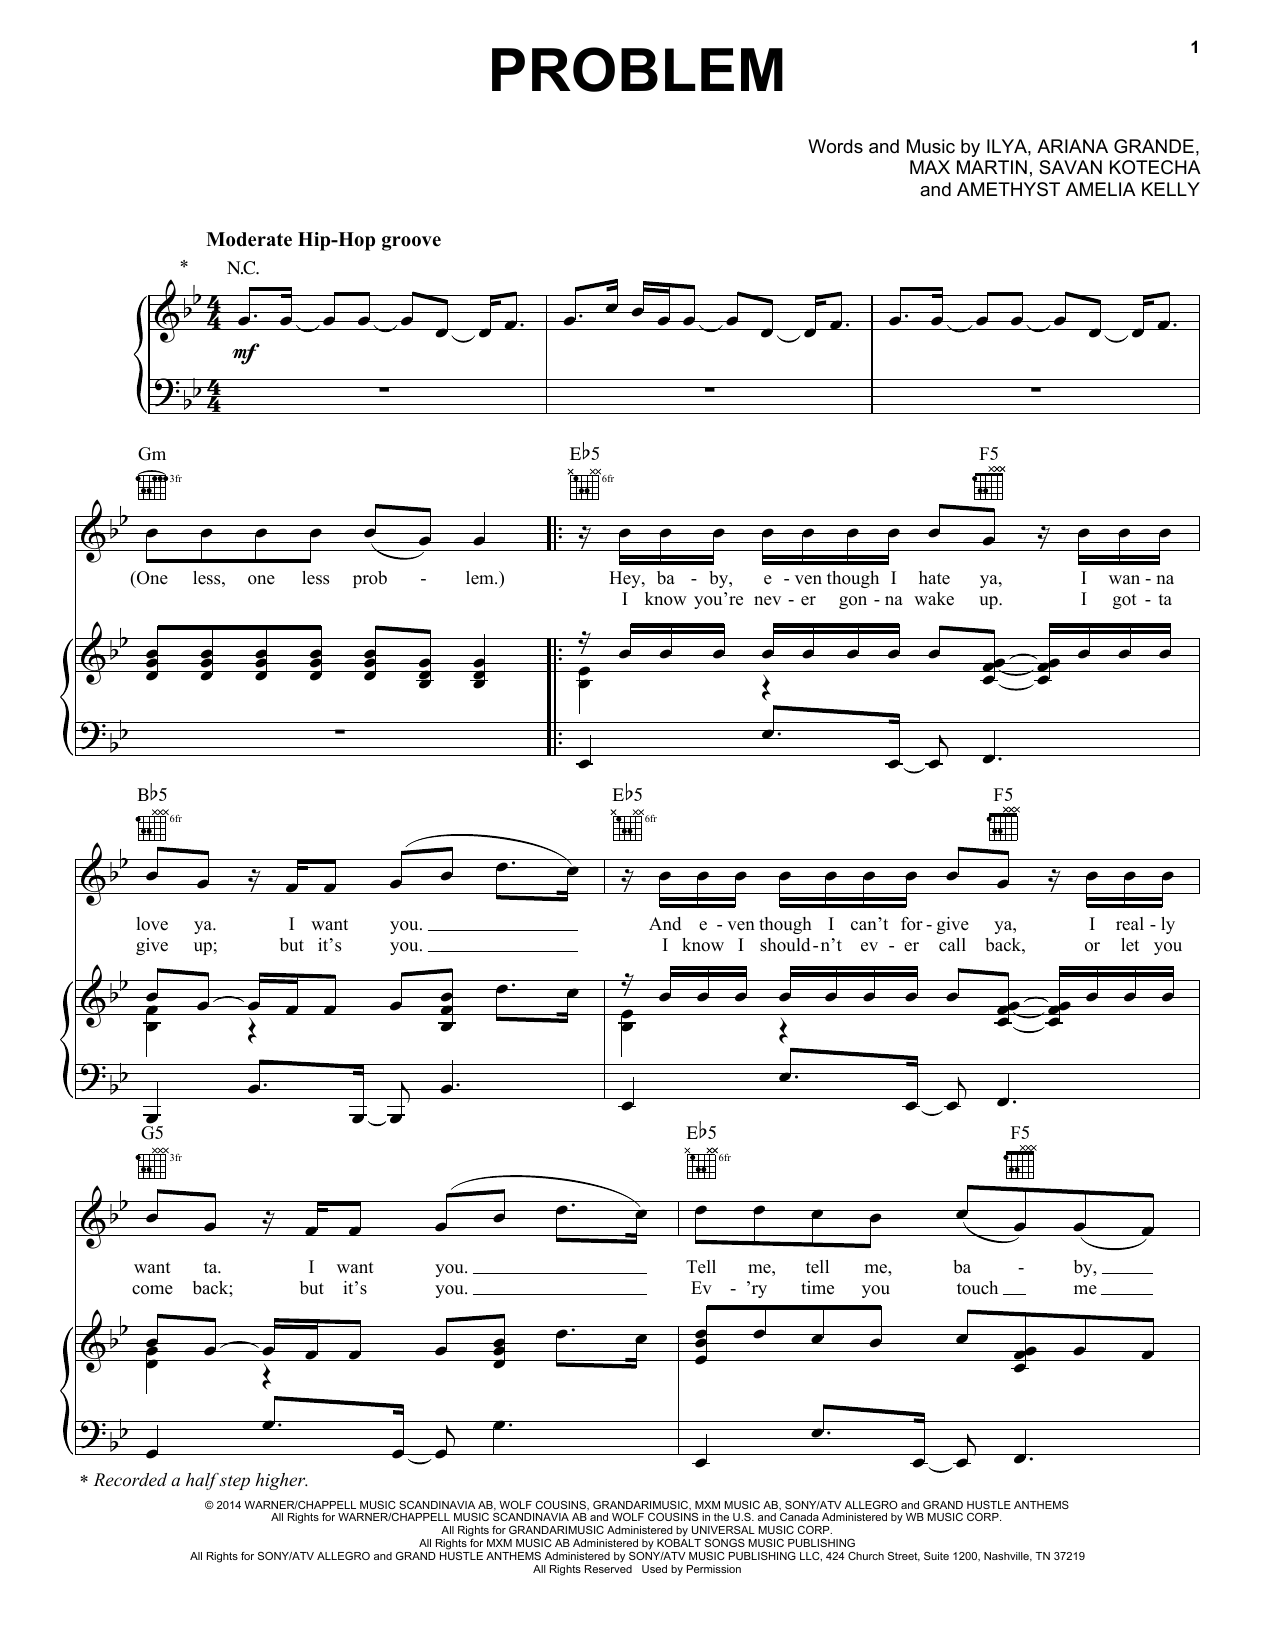 Ariana Grande Featuring Iggy Azalea Problem sheet music notes and chords. Download Printable PDF.